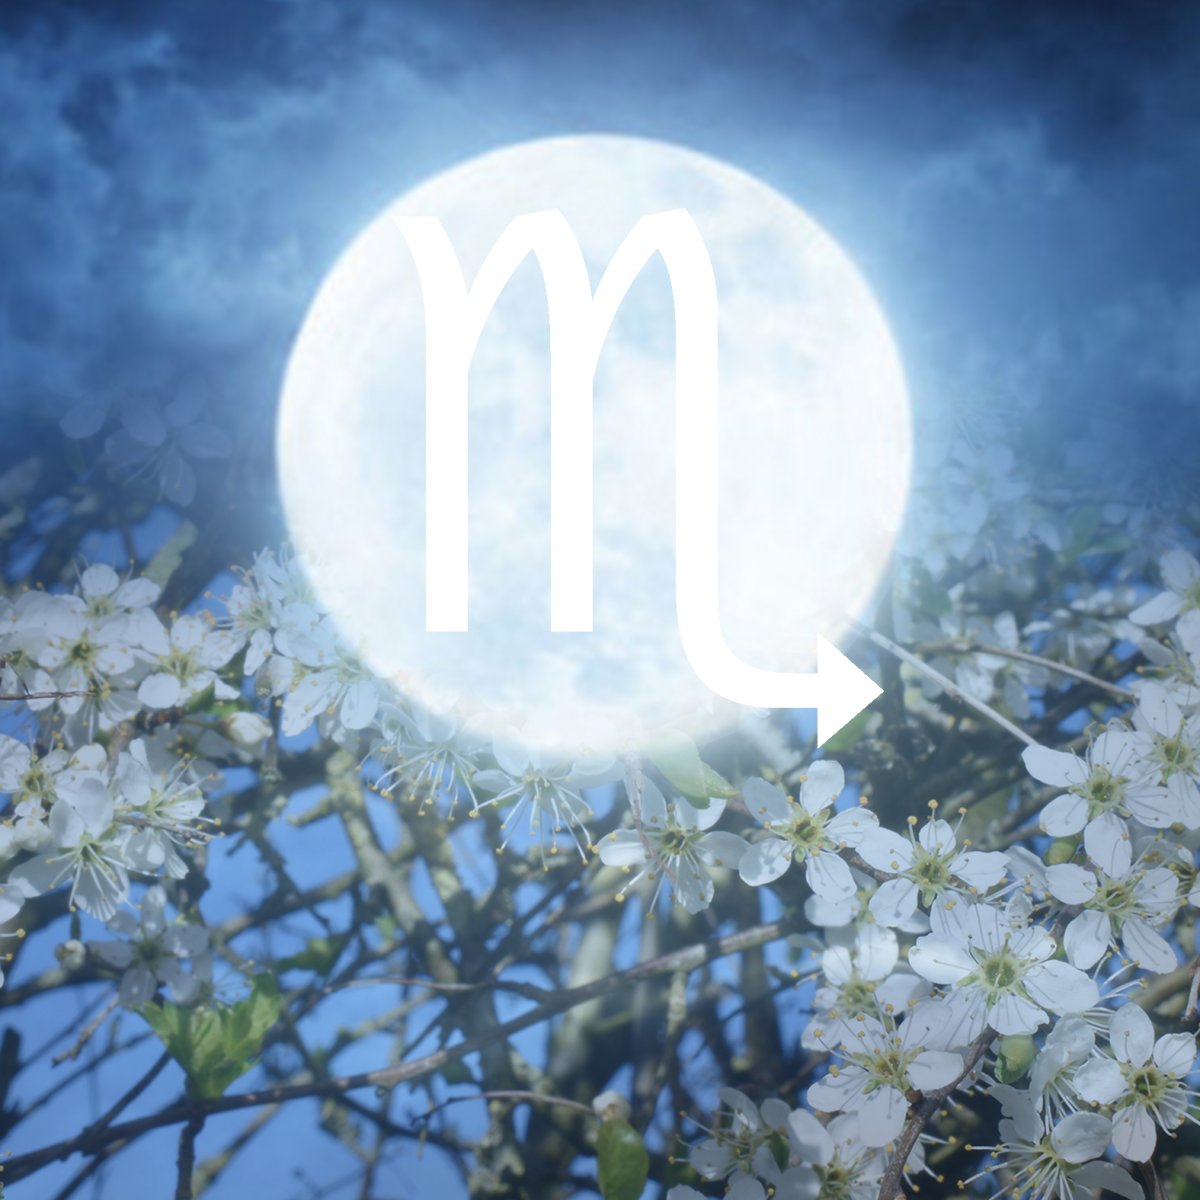 Welcome to the Full Flower Moon in Scorpio 